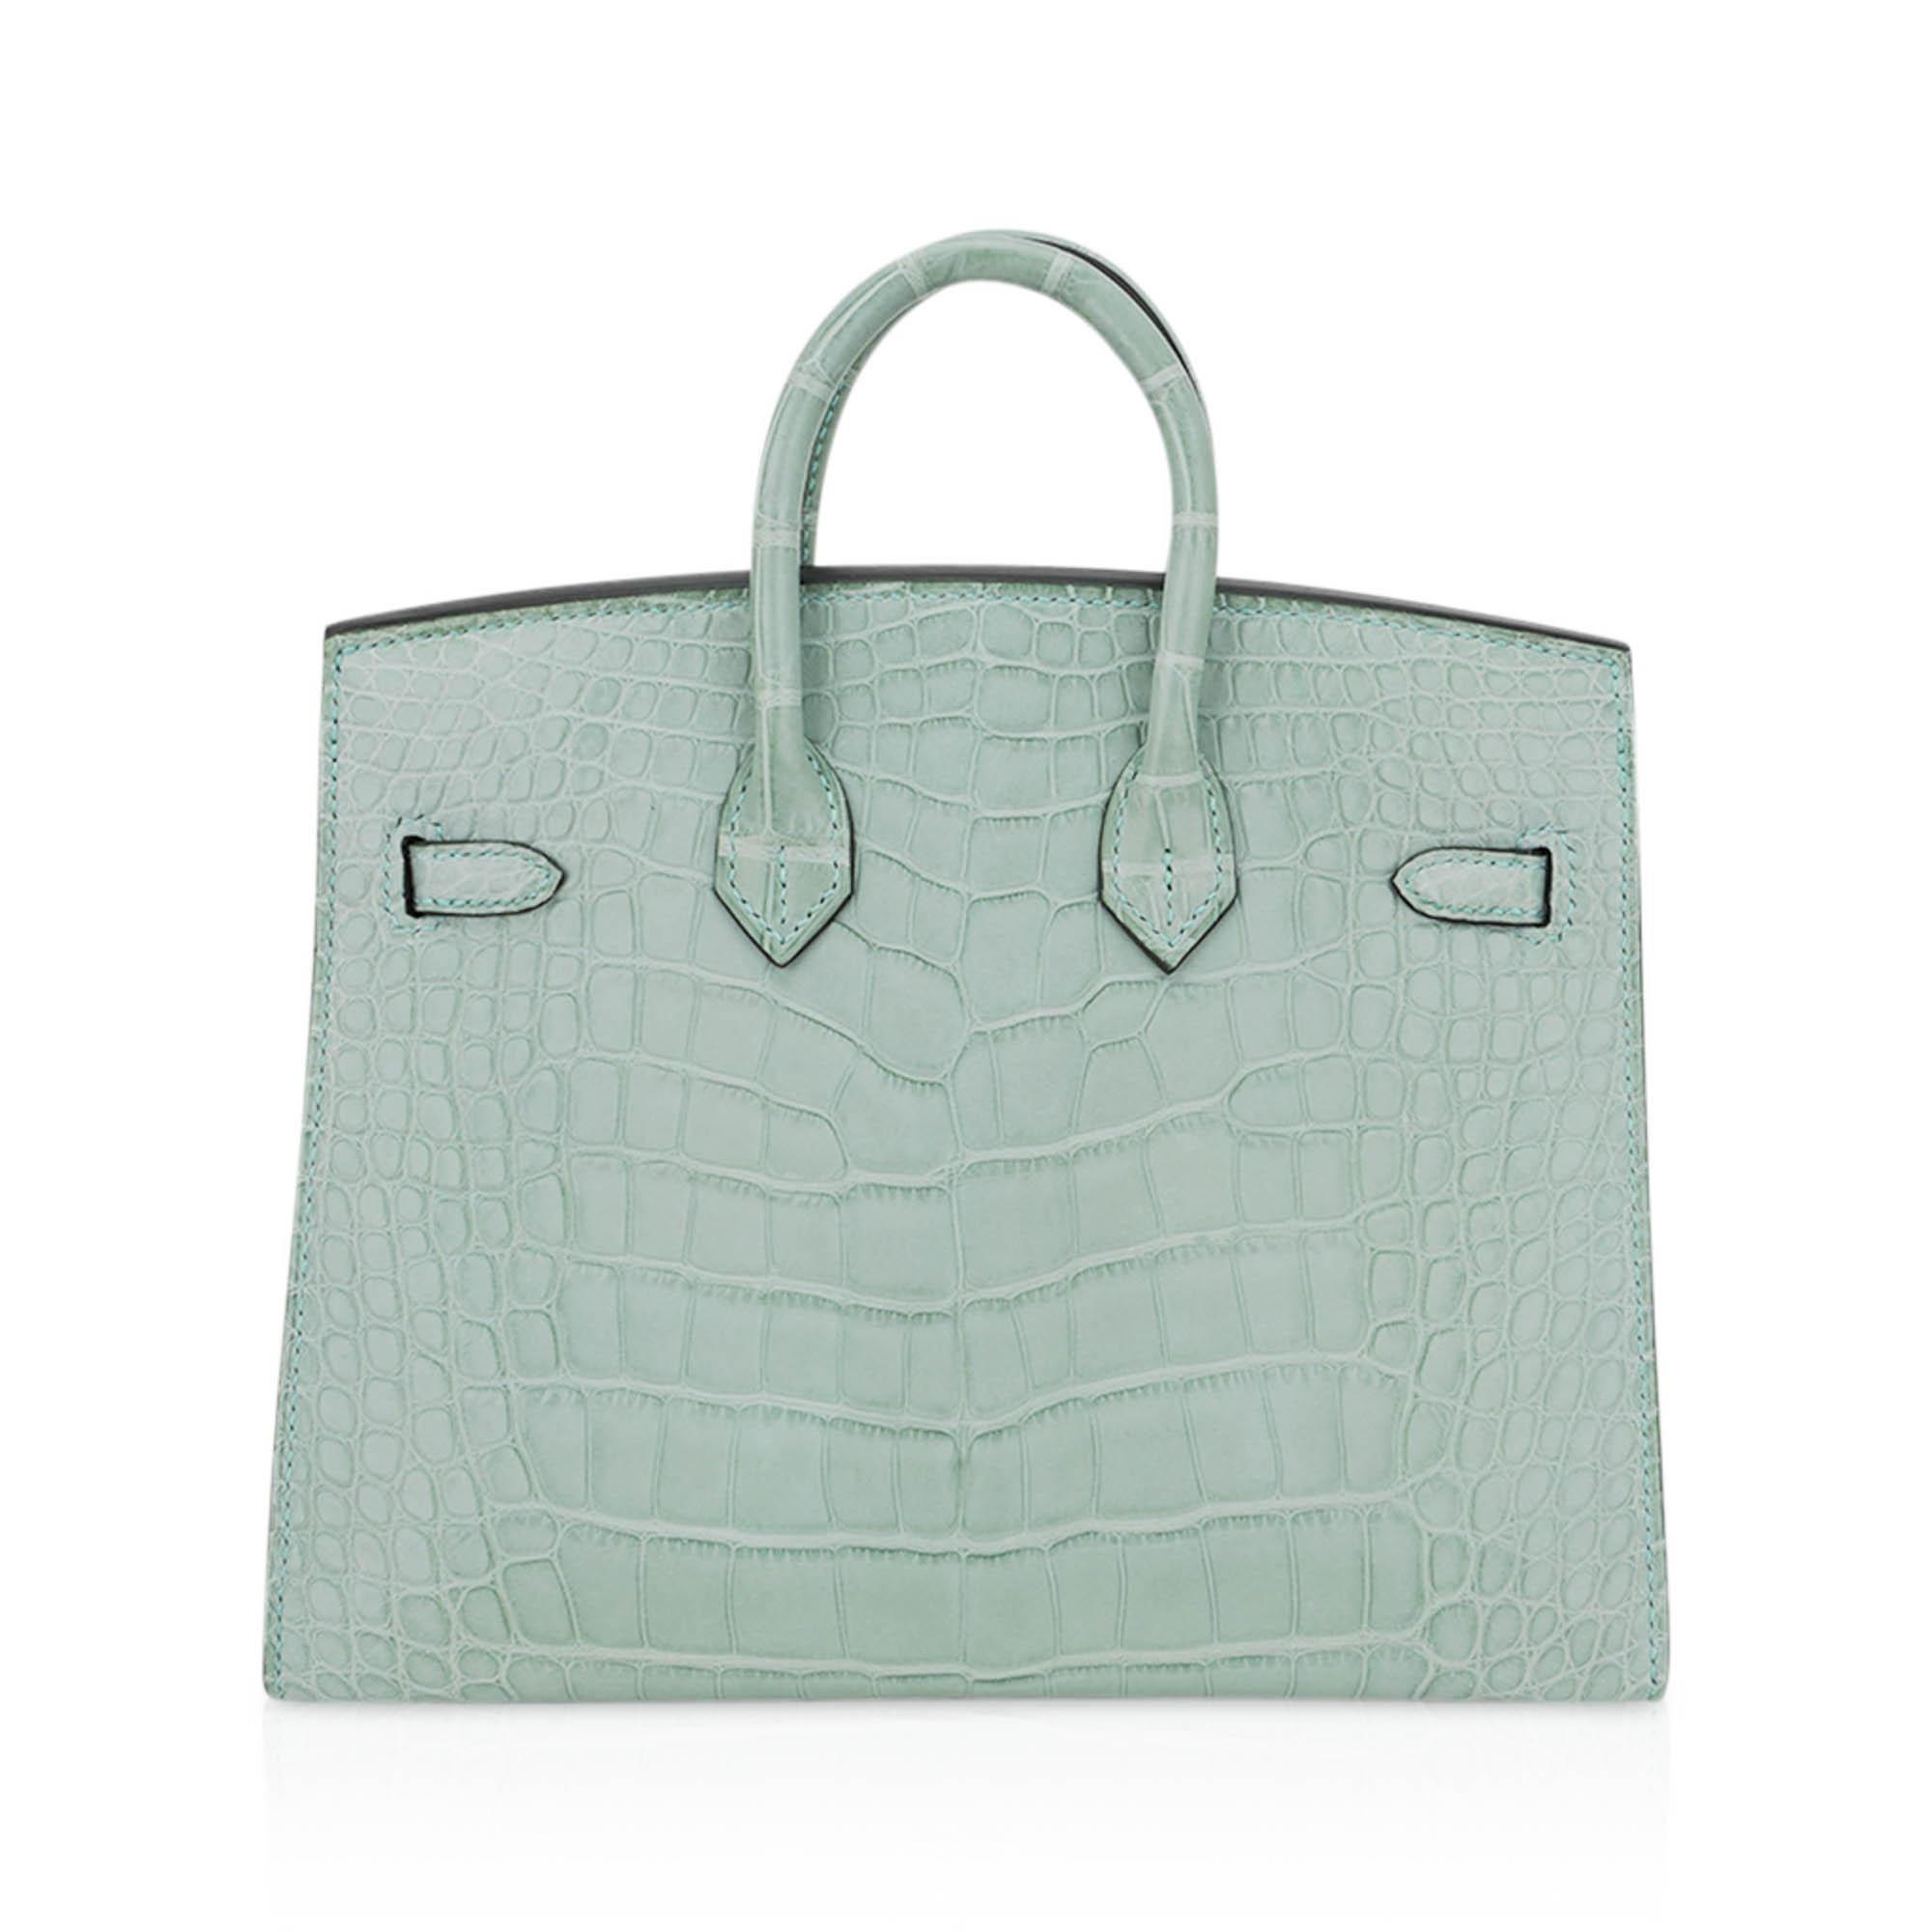 Hermes Birkin 20 Sellier Vert D'Eau Matte Alligator Limited Edition Bag In New Condition For Sale In Miami, FL